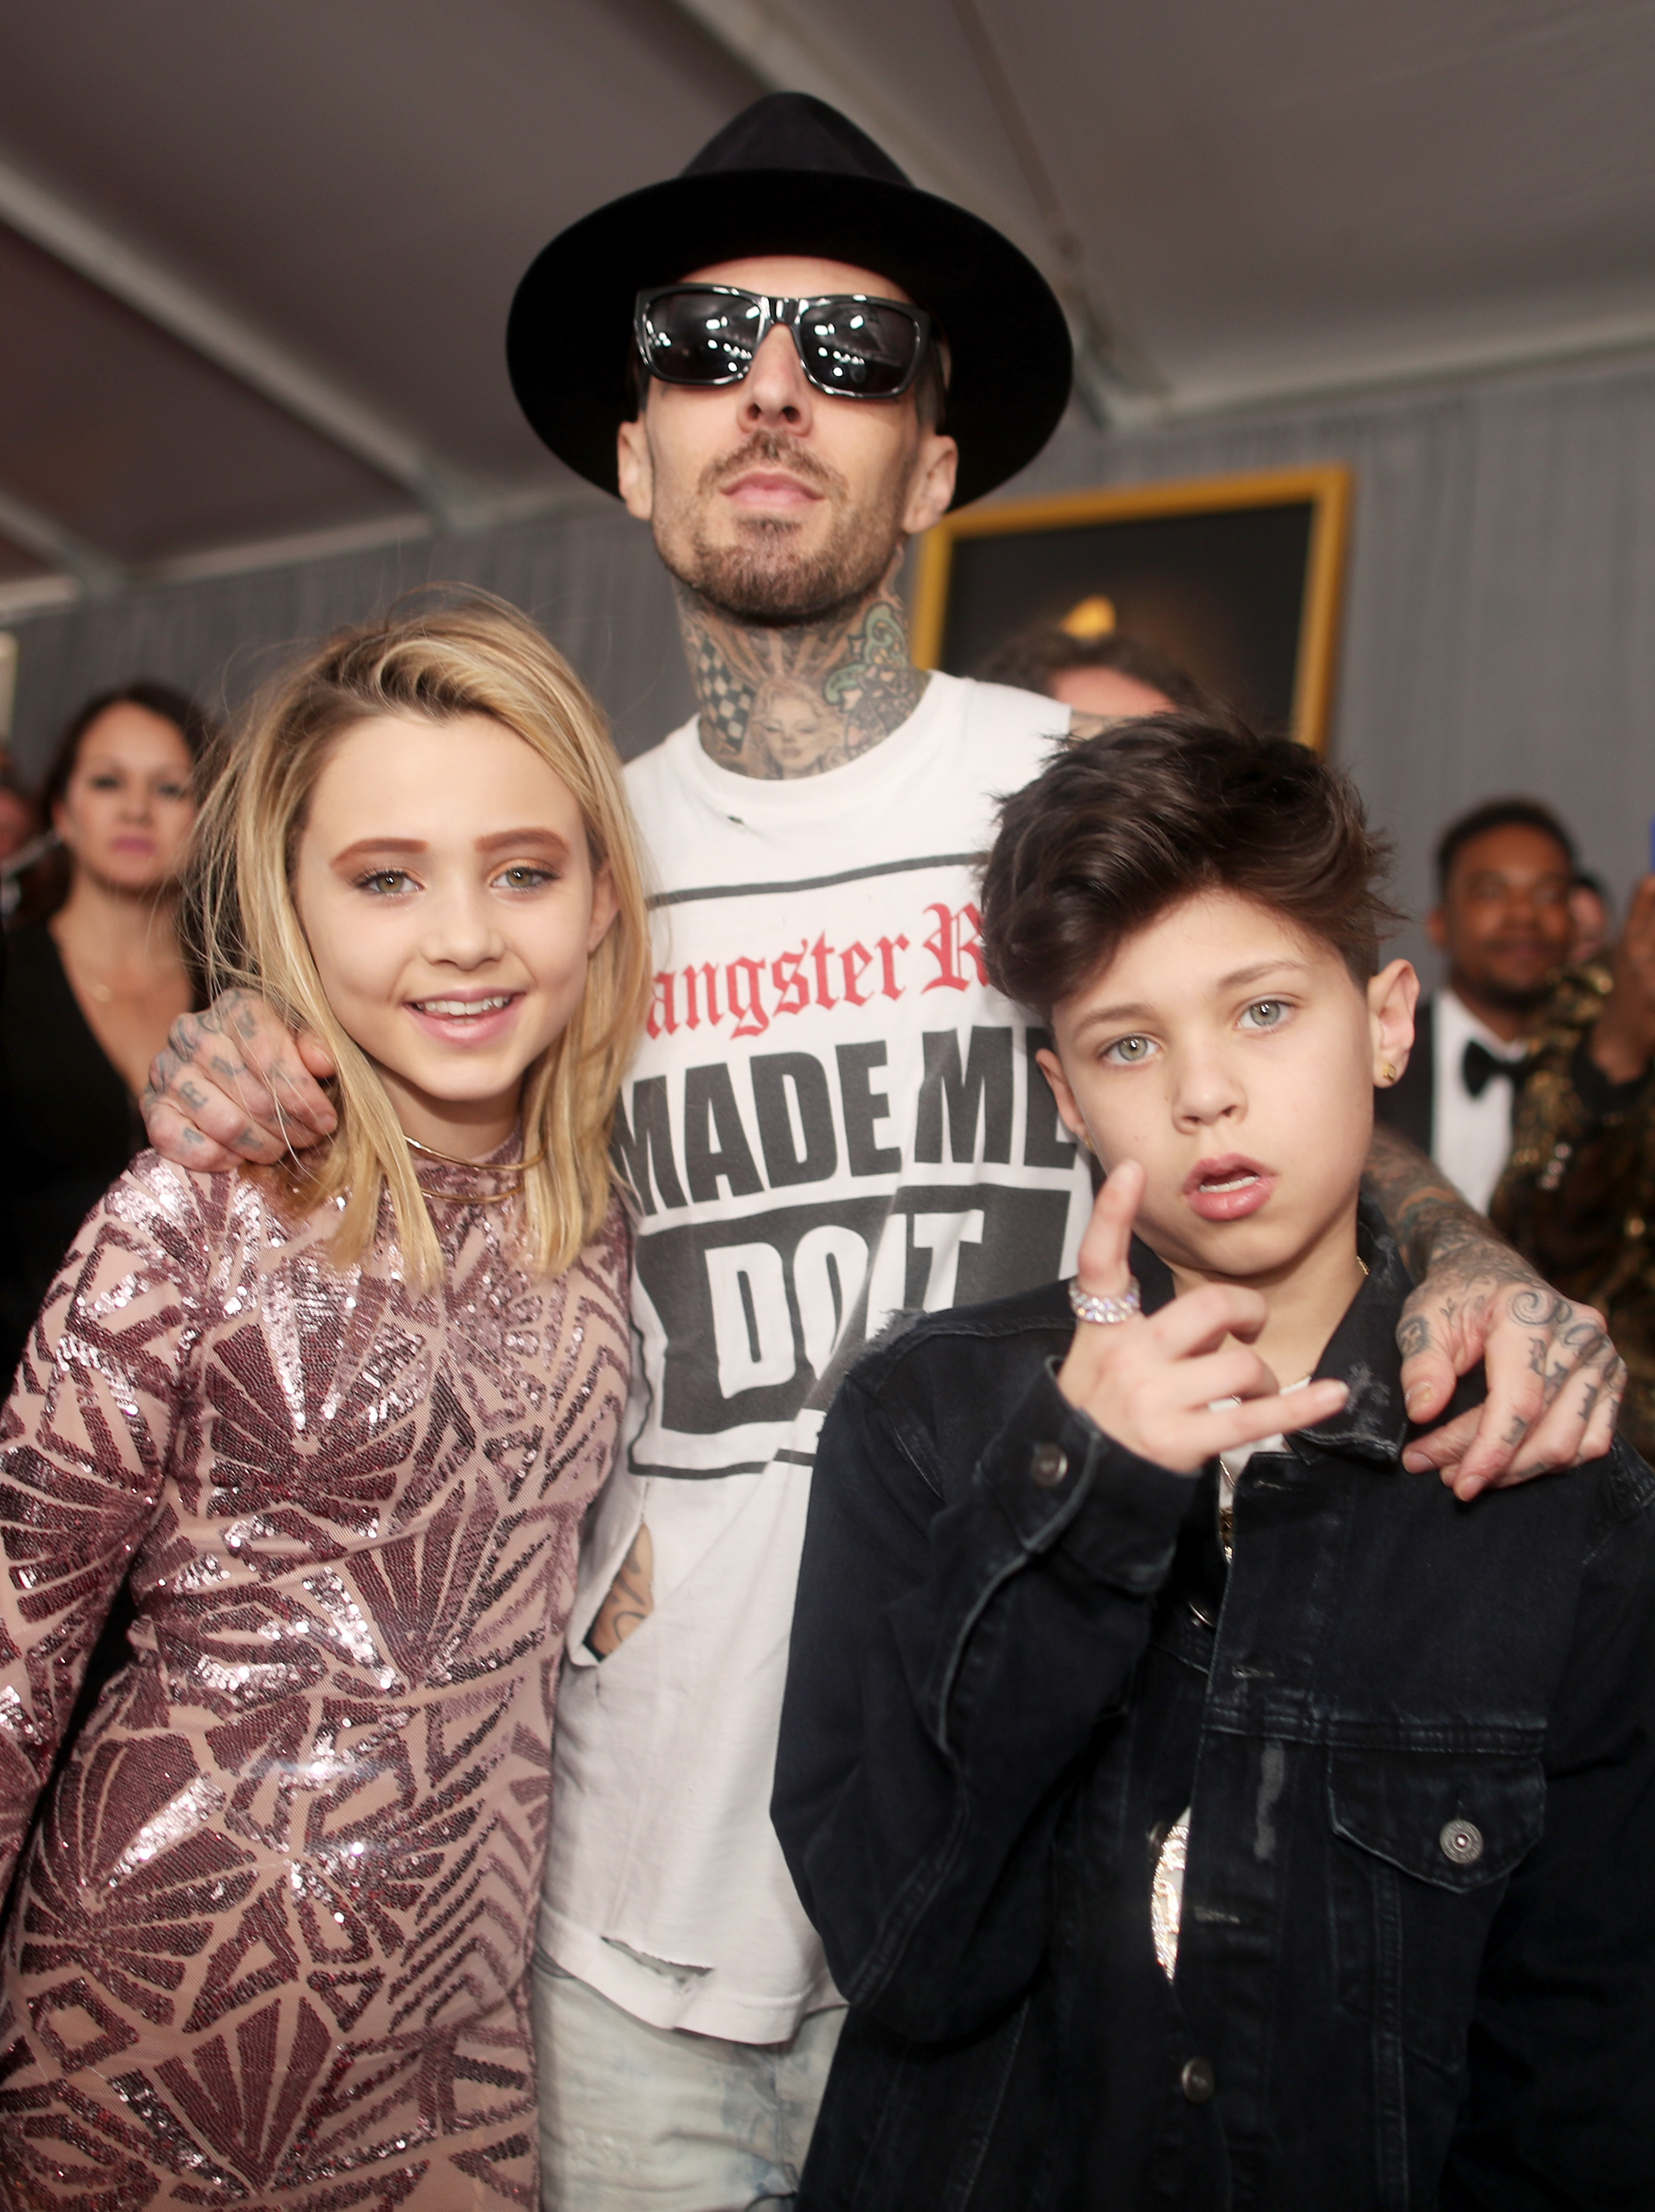 LOS ANGELES, CA - FEBRUARY 12: Musician Travis Barker of Blink-182 with children Alabama Barker and Landon Barker attend The 59th GRAMMY Awards at STAPLES Center on February 12, 2017 in Los Angeles, California. Christopher Polk/Getty Images for NARAS/AFP